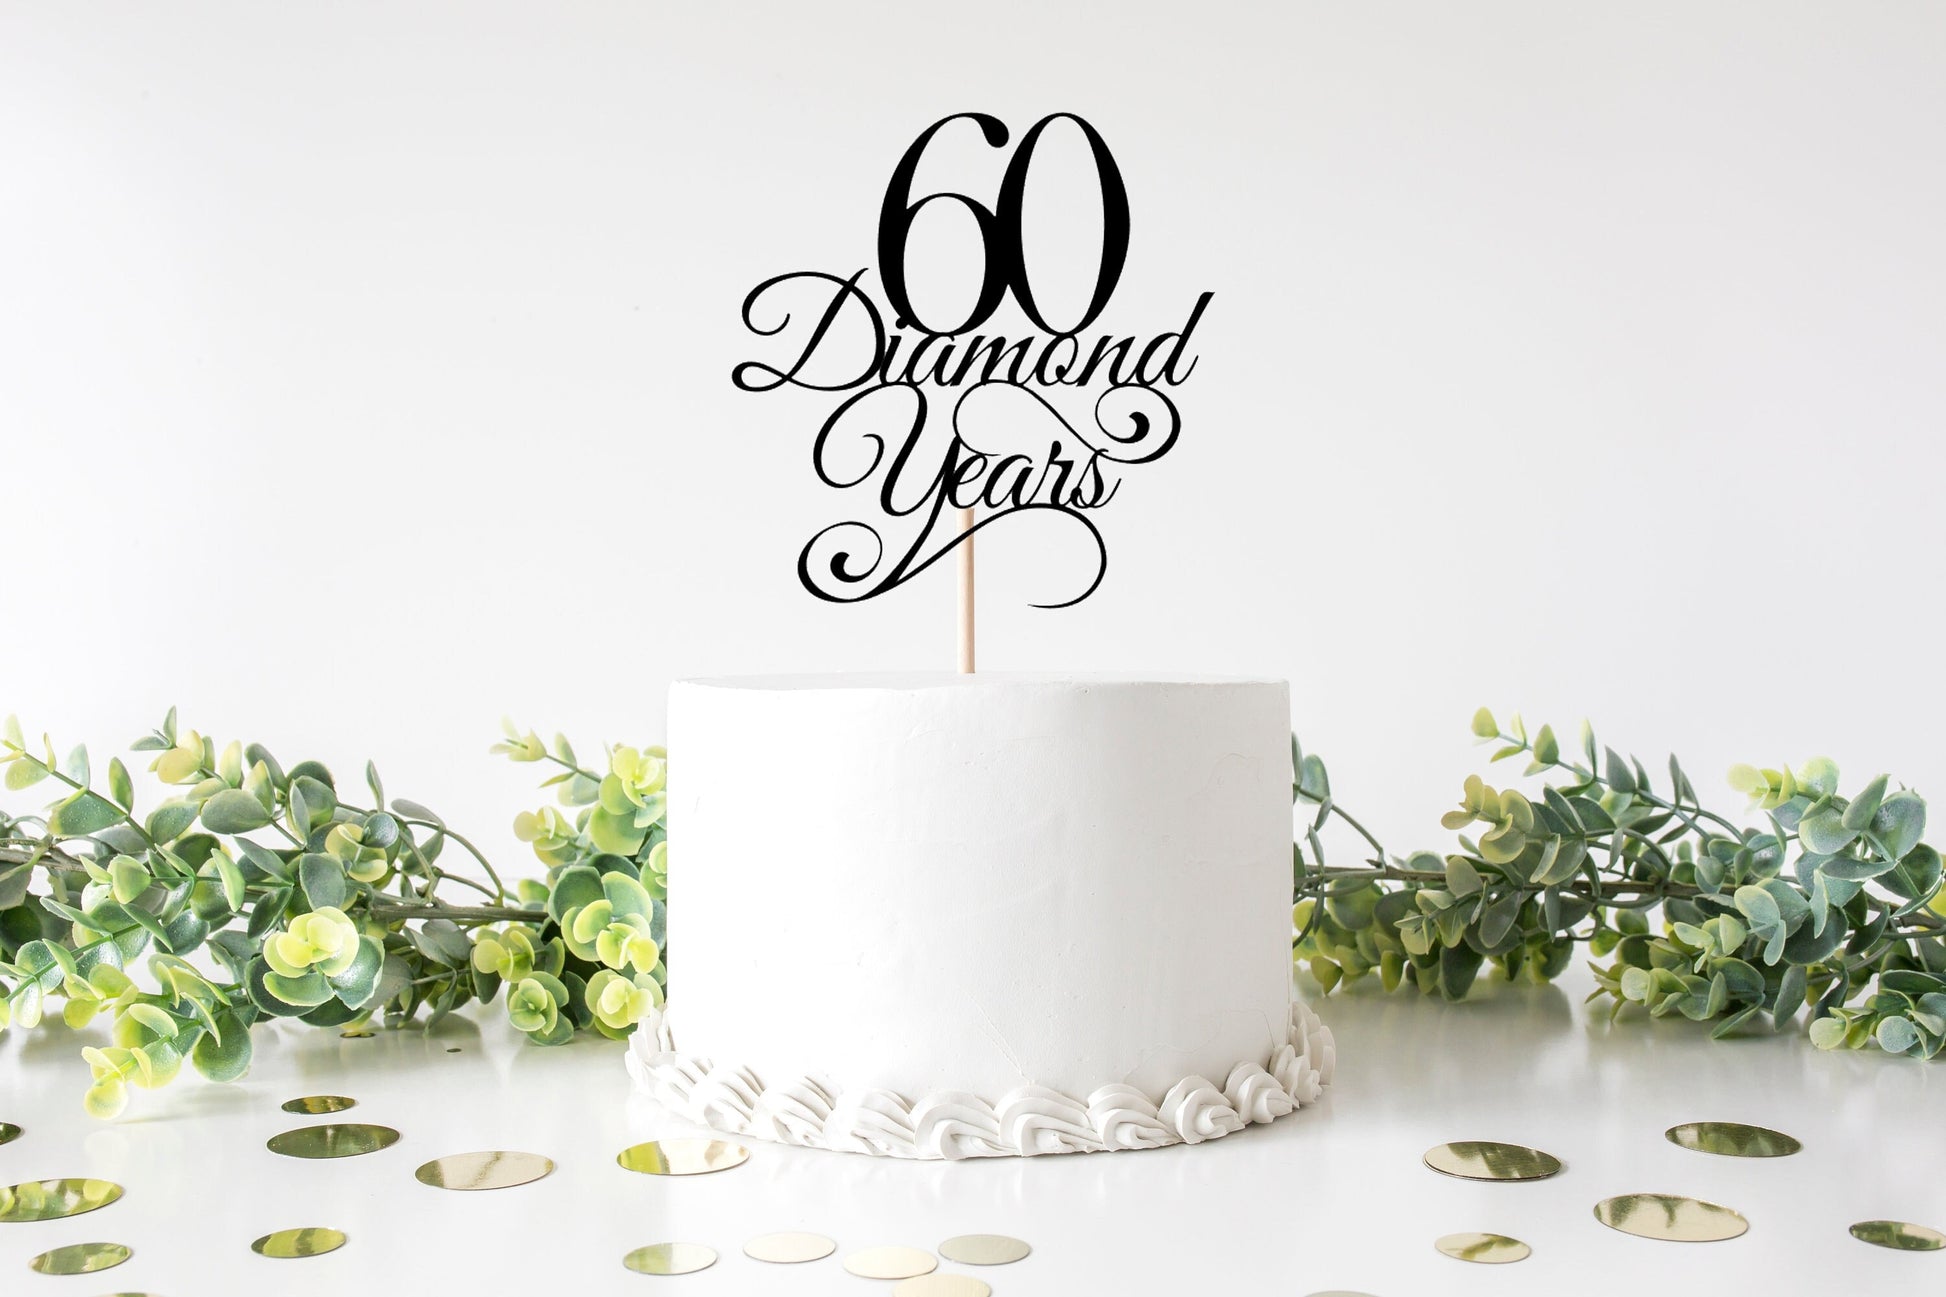 60 Sixty Diamond Years Anniversary cake topper digital cut file suitable for Cricut or Silhouette, svg, jpeg, png, pdf - Resplendent Aurora